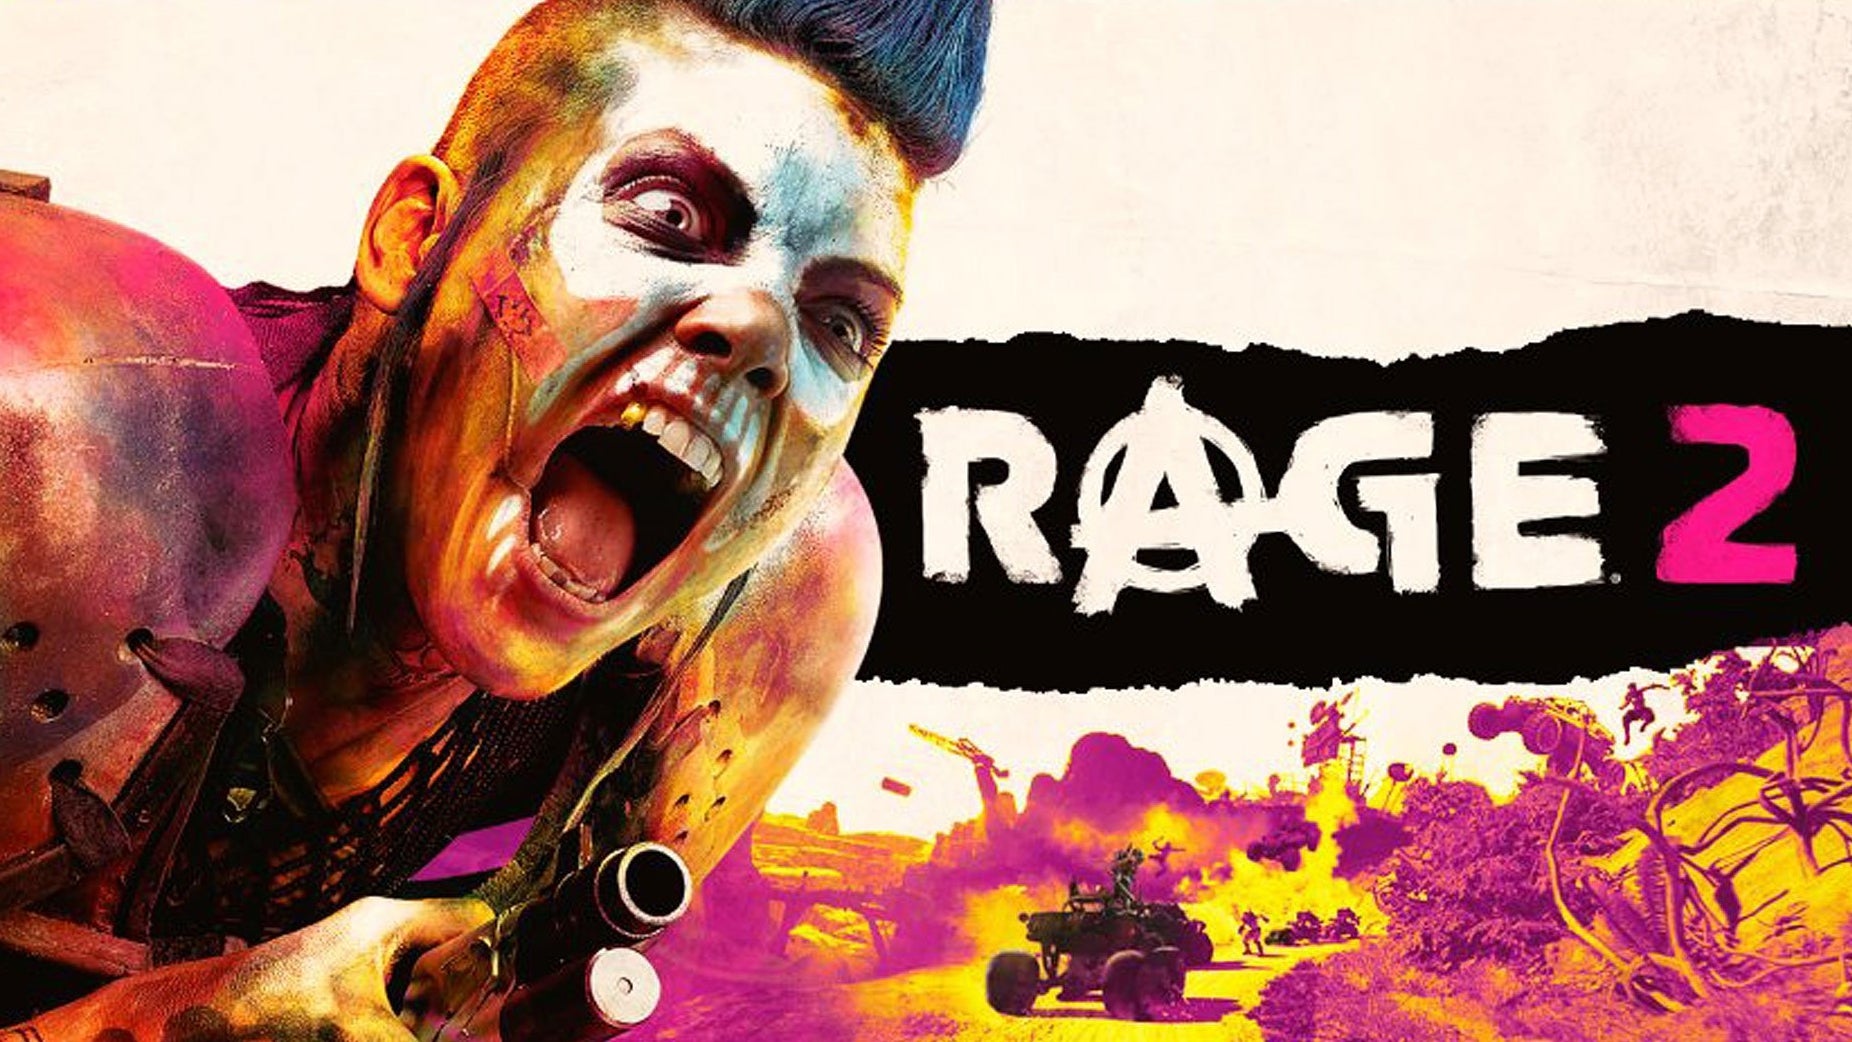 Image for Rage 2 won't have multiplayer but will have "a social component"